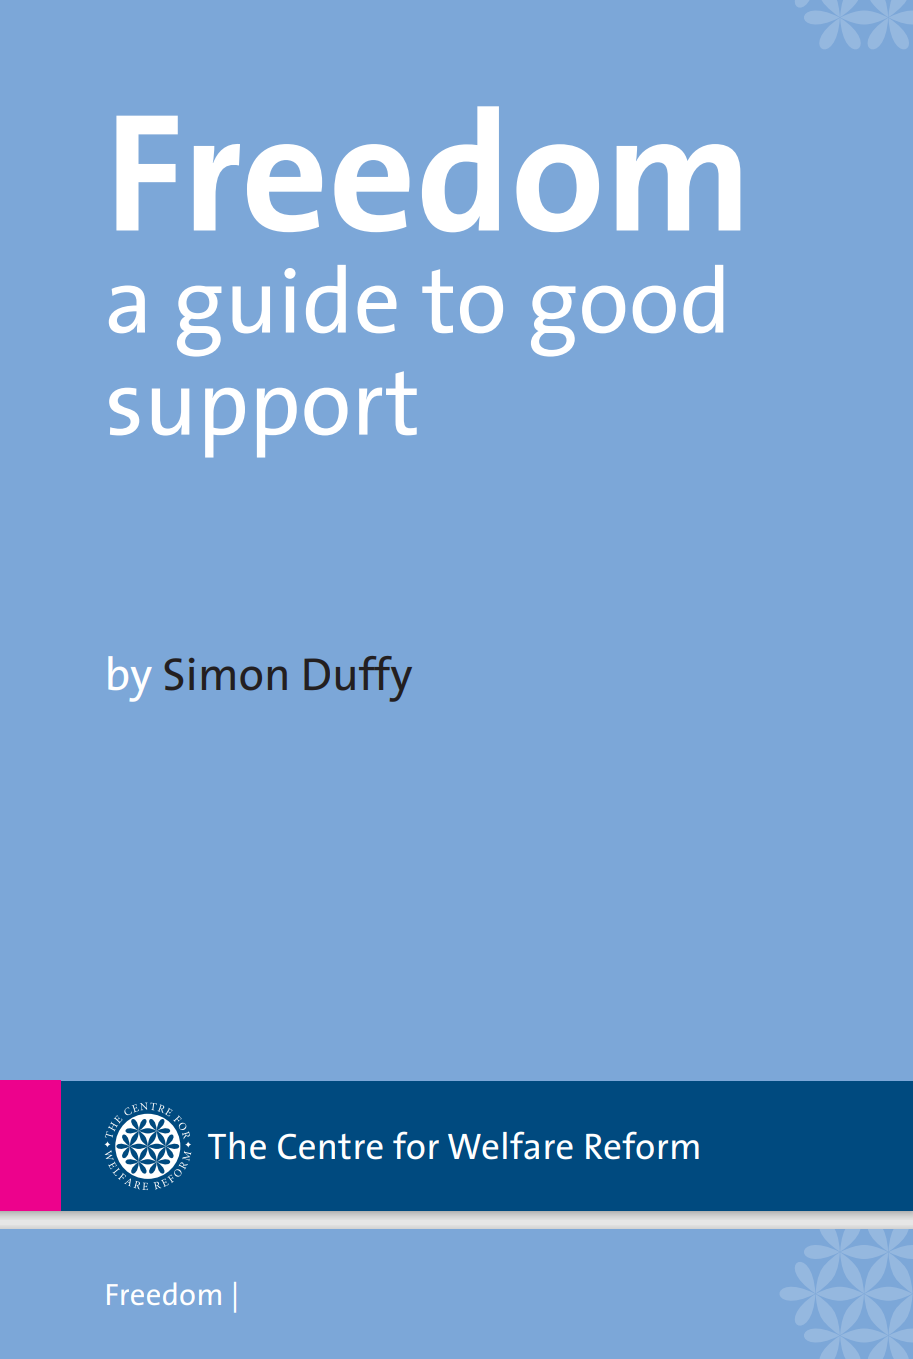 Cover art for: Freedom: A guide to good support